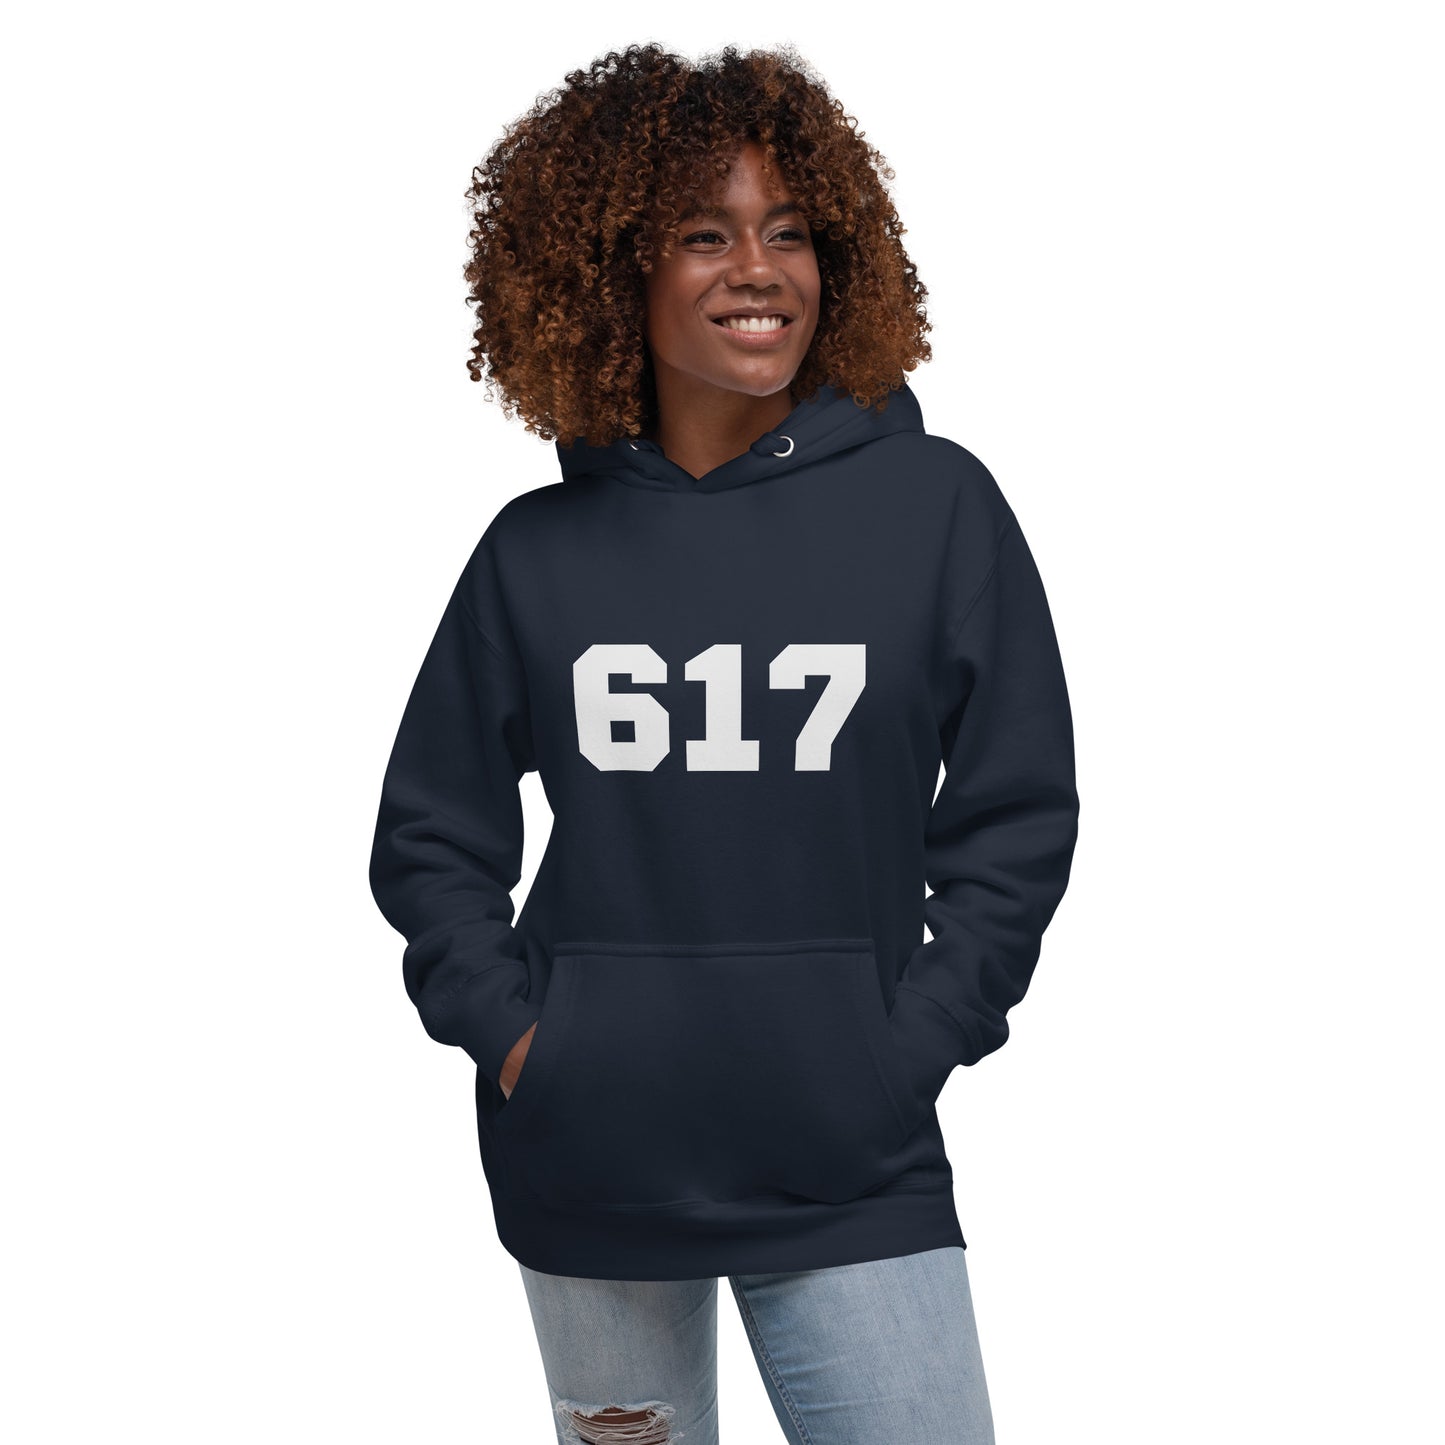 617 New England Strong Hoodie